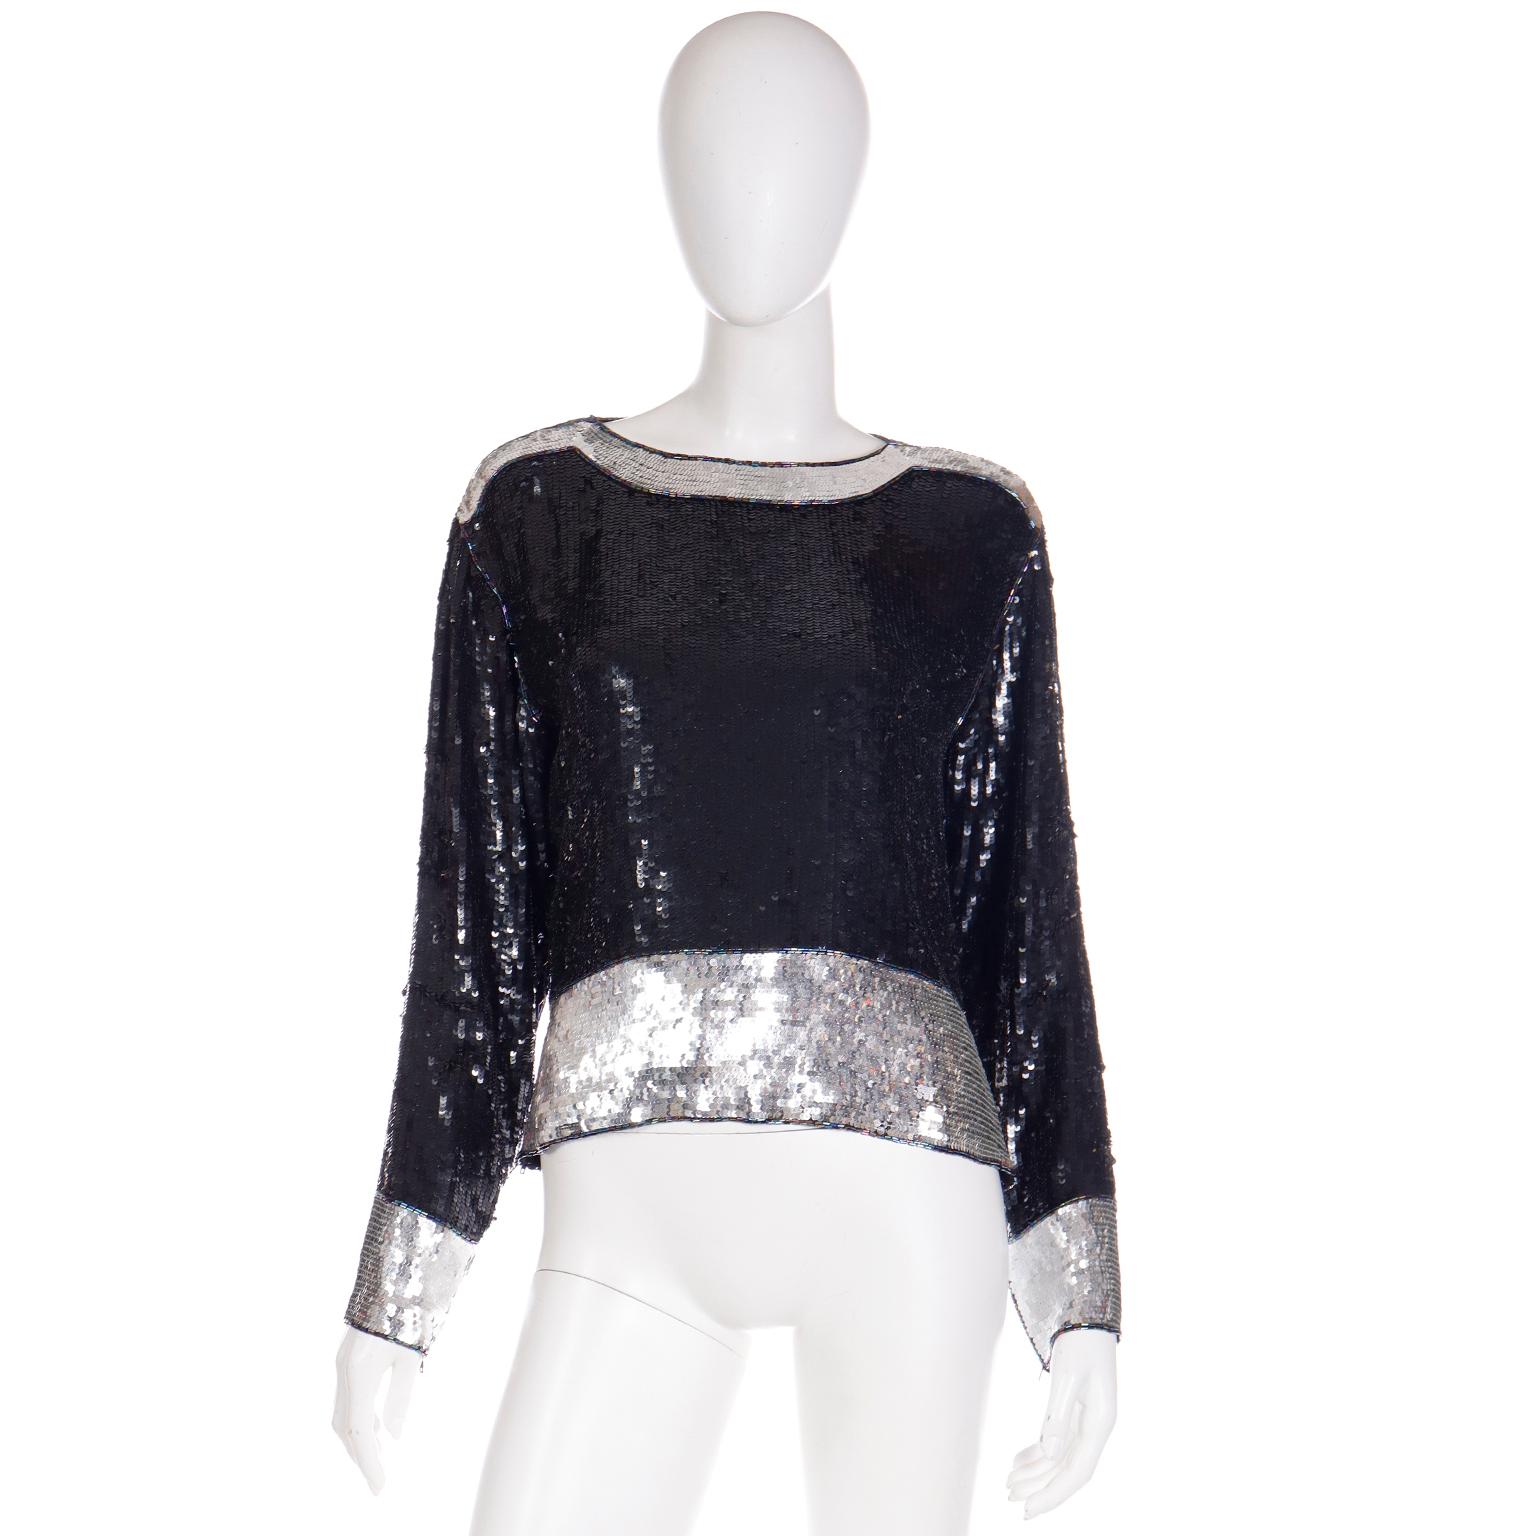 This is a fabulous vintage Yves Saint Laurent 1970's top made of 100% silk that is covered in black and silver sequins. The top has iridescent black bugle beads that trim the shoulders, neckline, cuffs and hemline. The body of the piece is black and